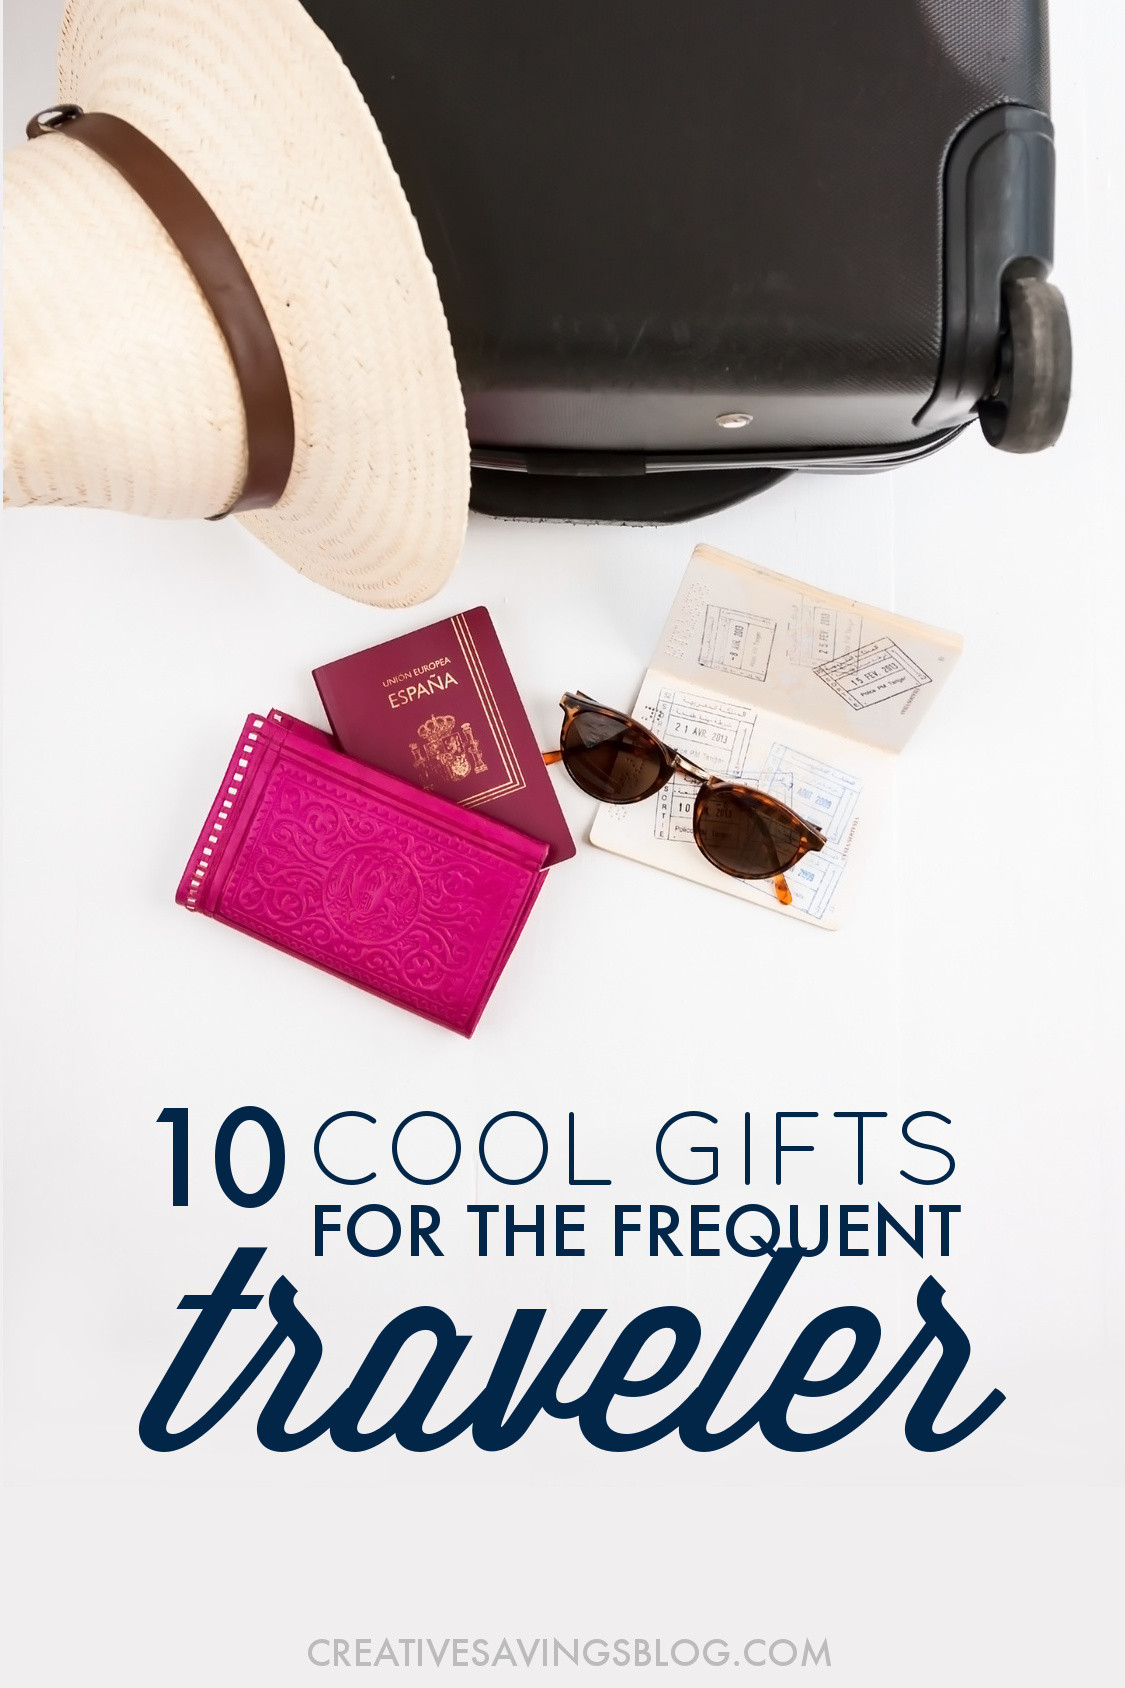 Best Gift Ideas For Travelers
 Best Gifts for Travelers